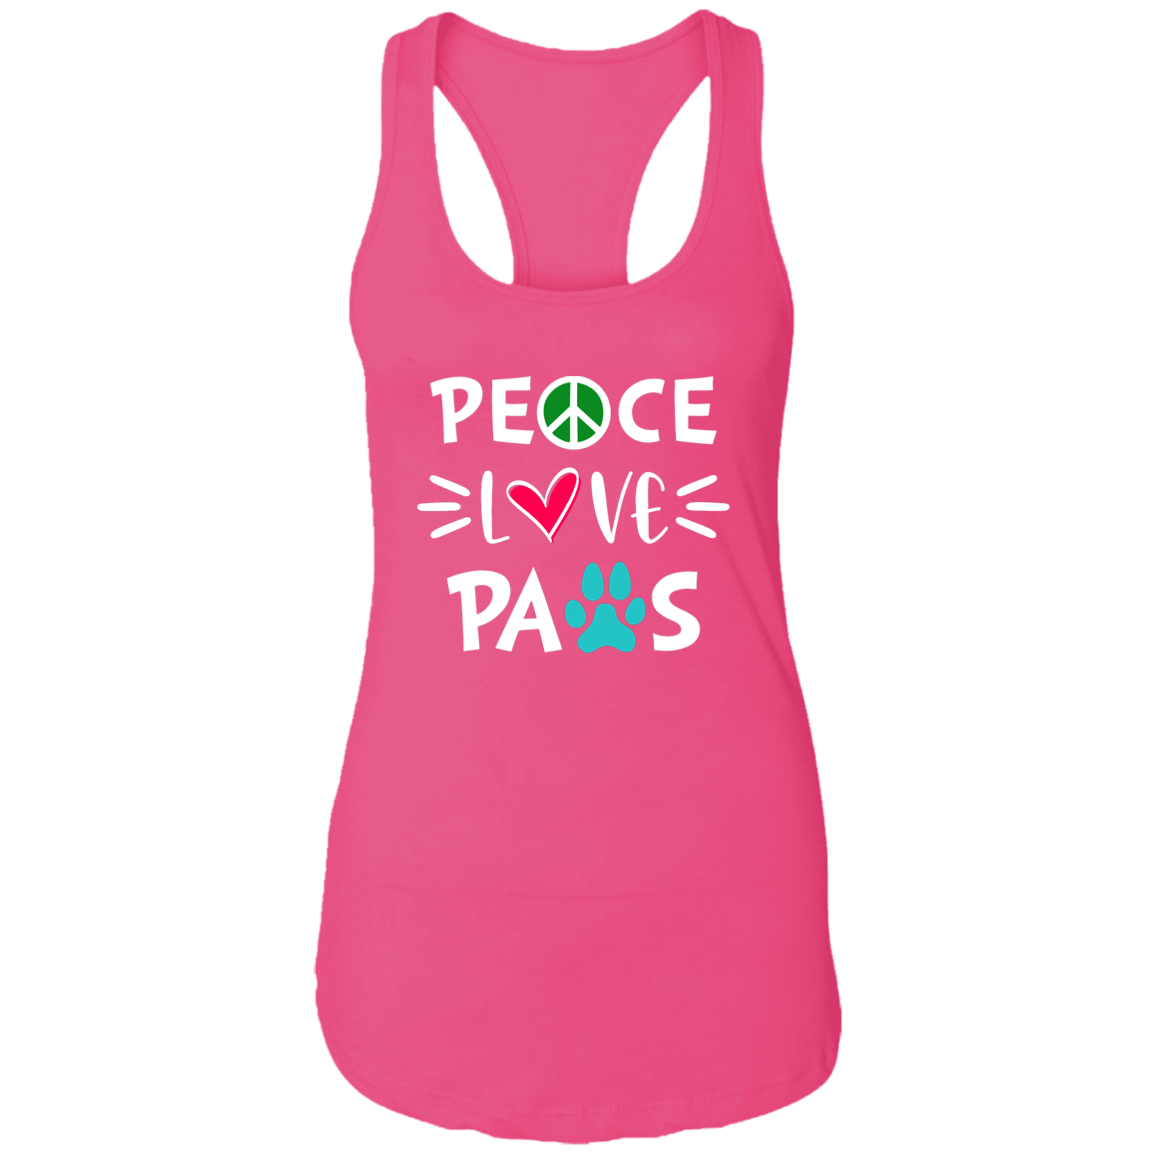 Peace Love Paws - Ladies Racer Back Tank.